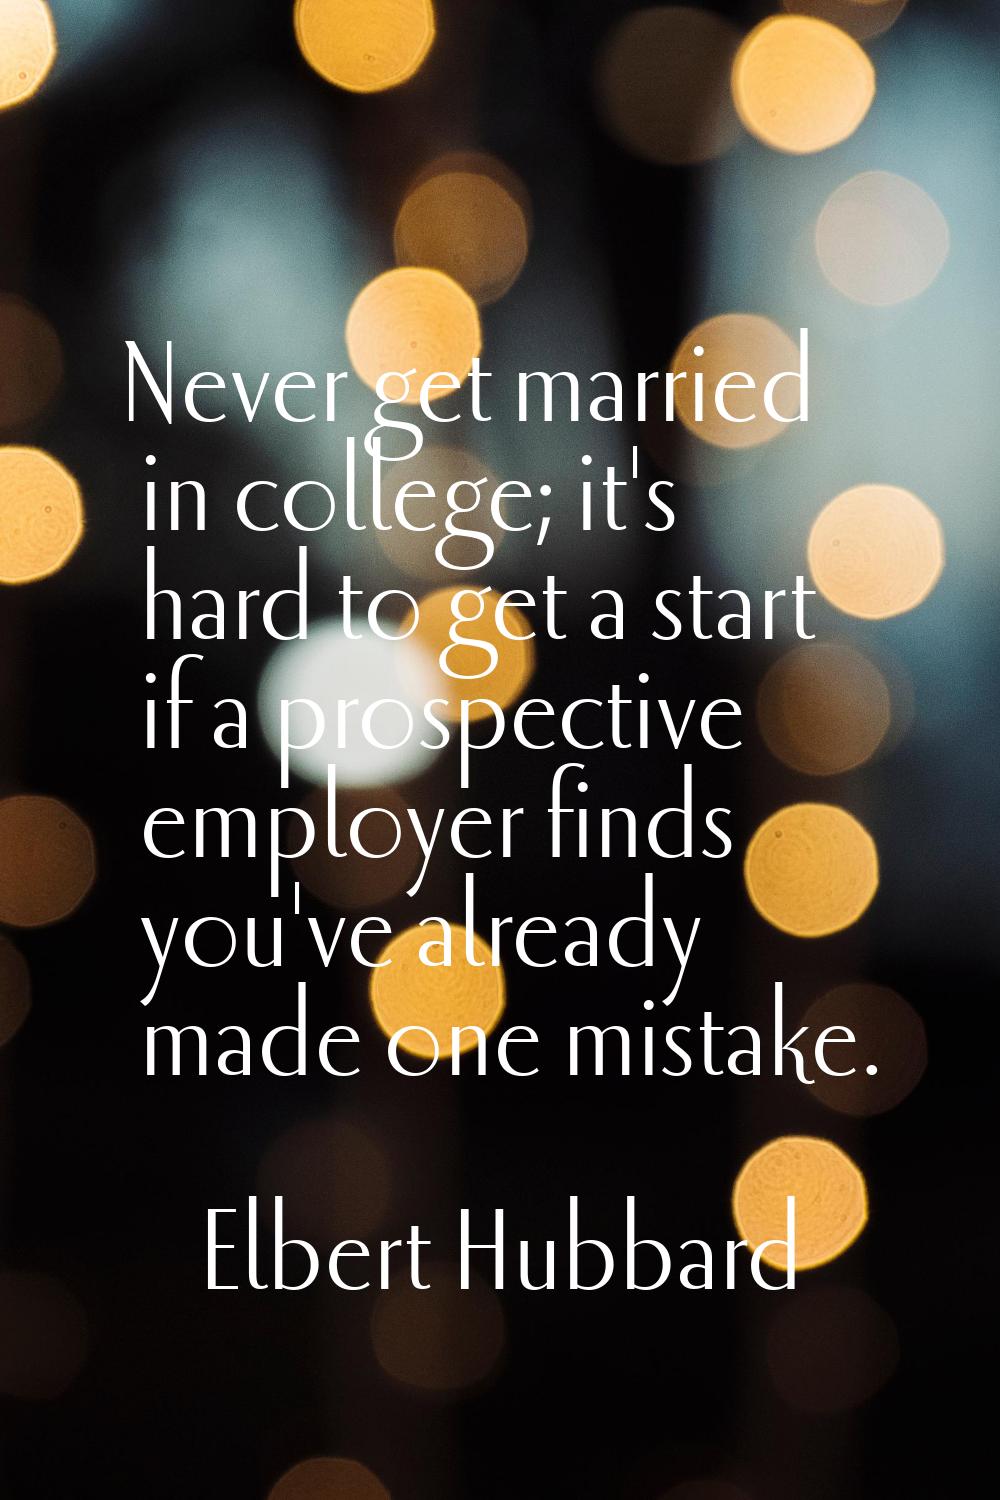 Never get married in college; it's hard to get a start if a prospective employer finds you've alrea